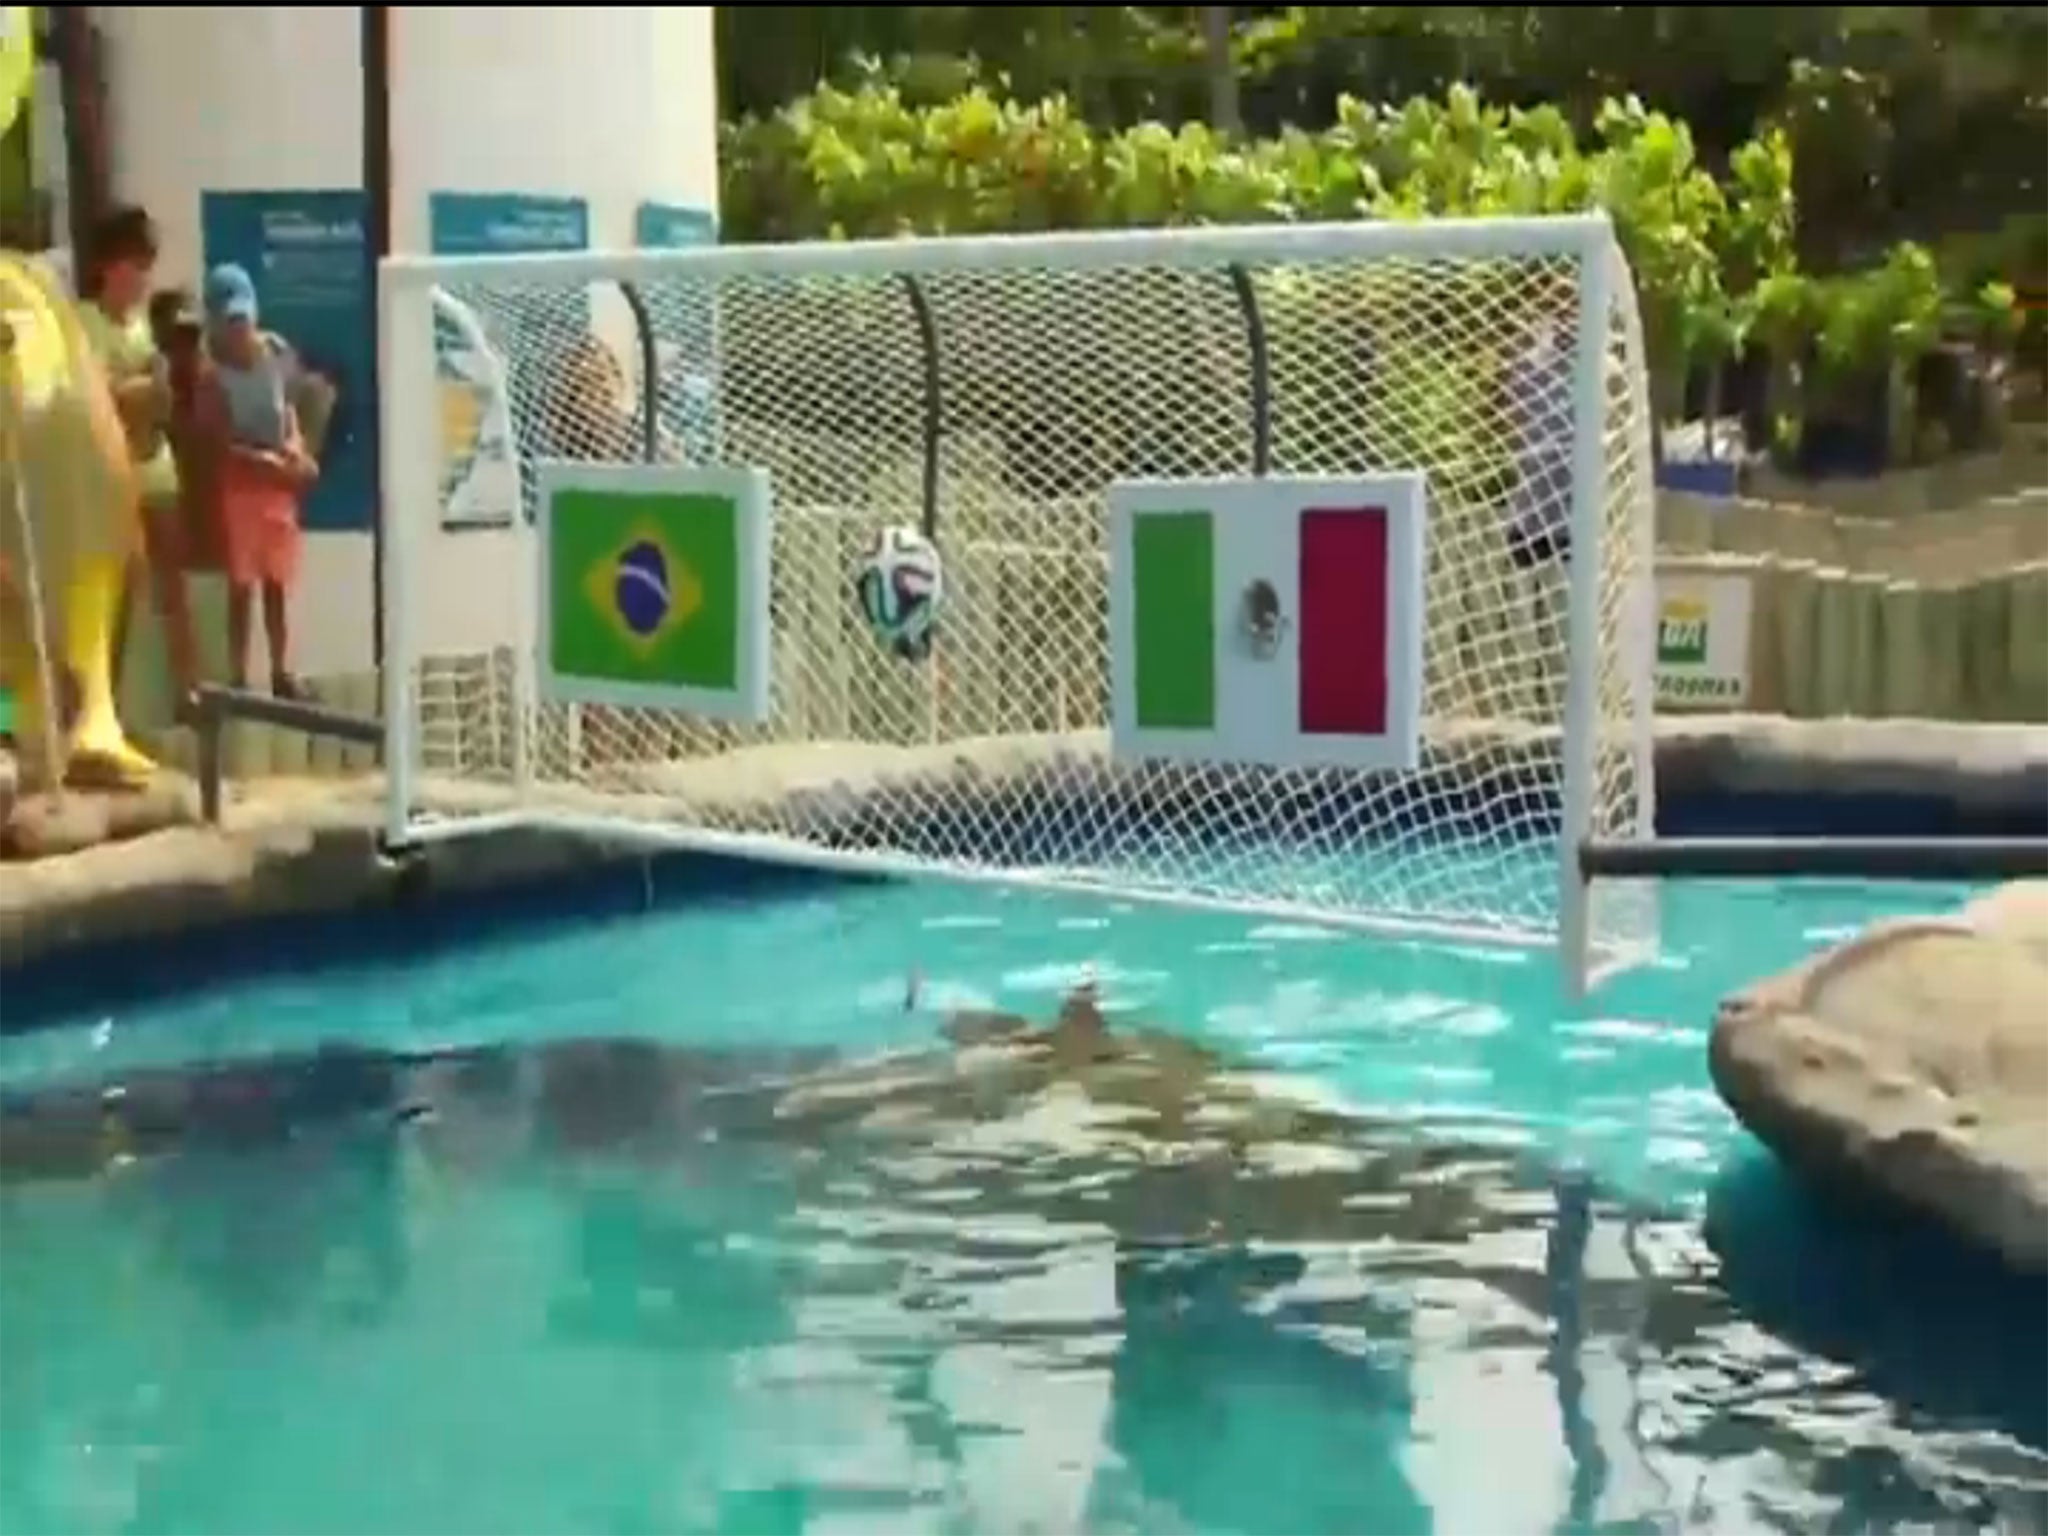 Cabeção, the 'psychic' turtle, predicts Mexico to beat Brazil in the 2014 World Cup